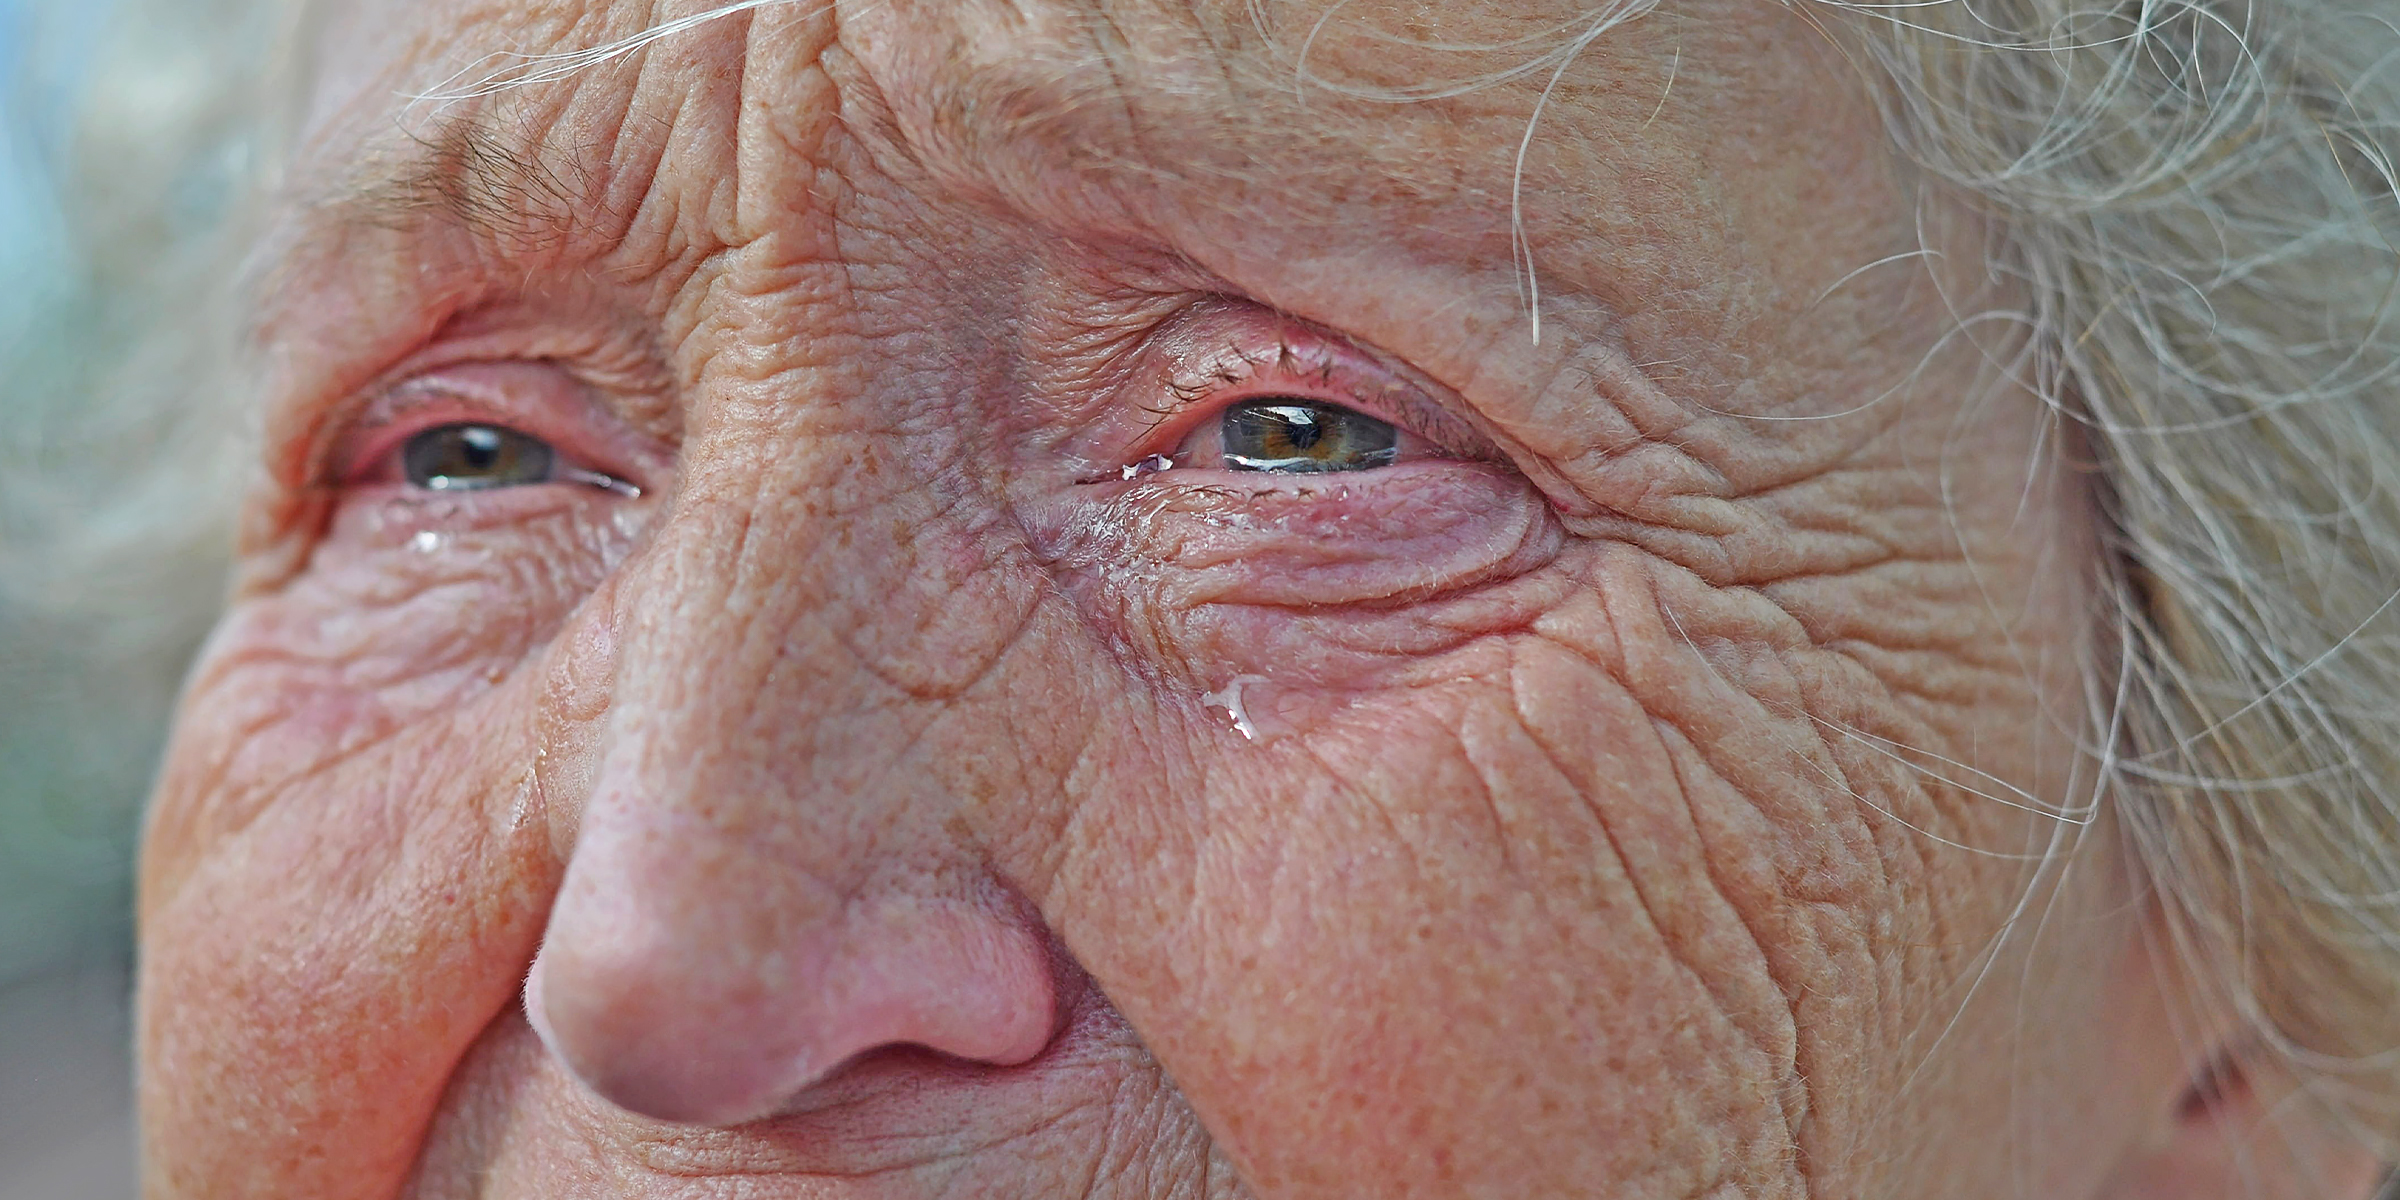 Crying elderly lady | Source: Shutterstock